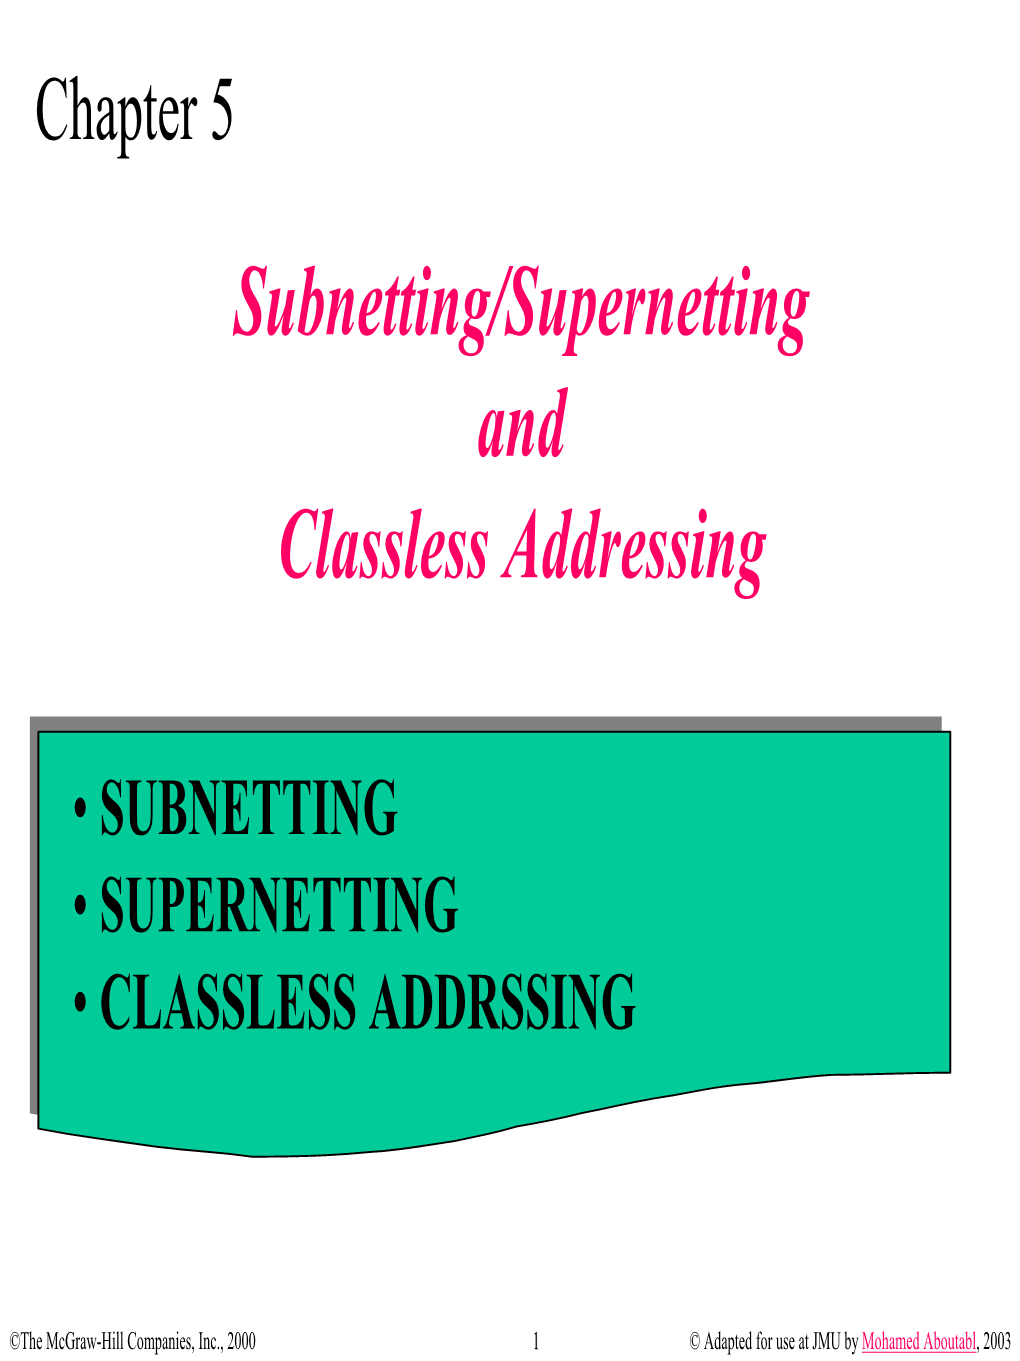 Subnetting/Supernetting and Classless Addressing